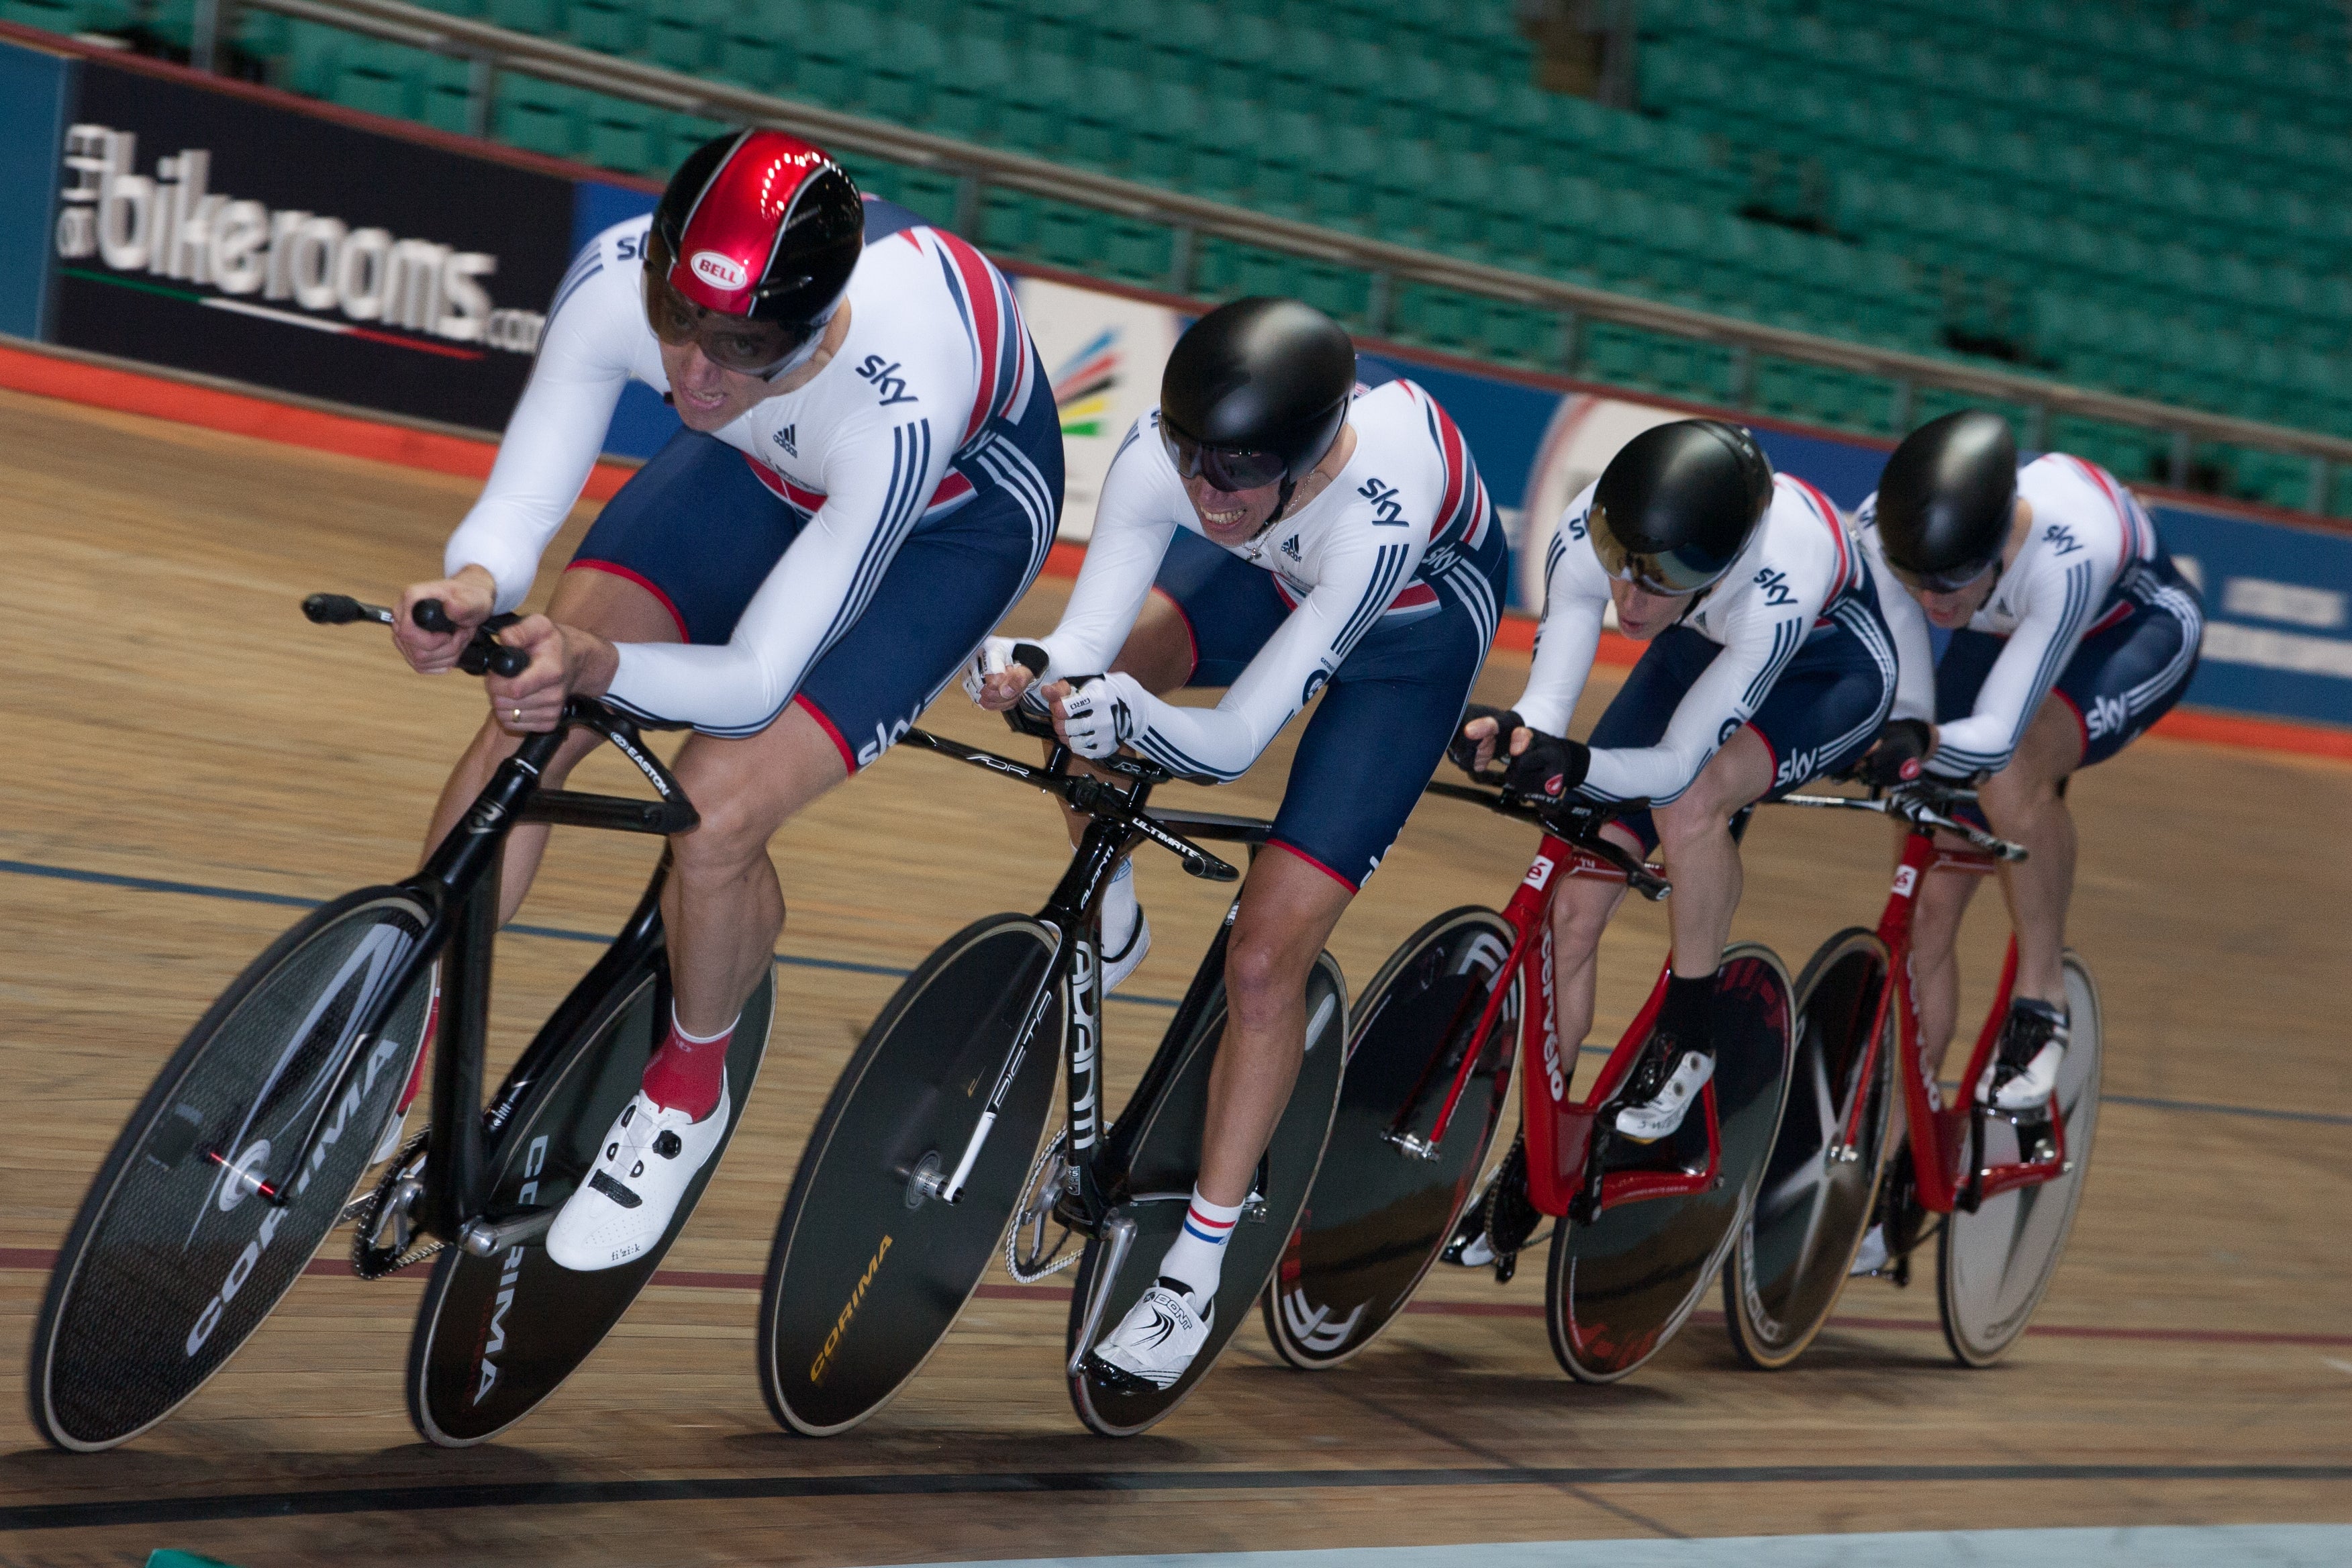 In action at the UCI Masters Track Cycling World Championships 2015 on our way to the silver medal. I'm third man.